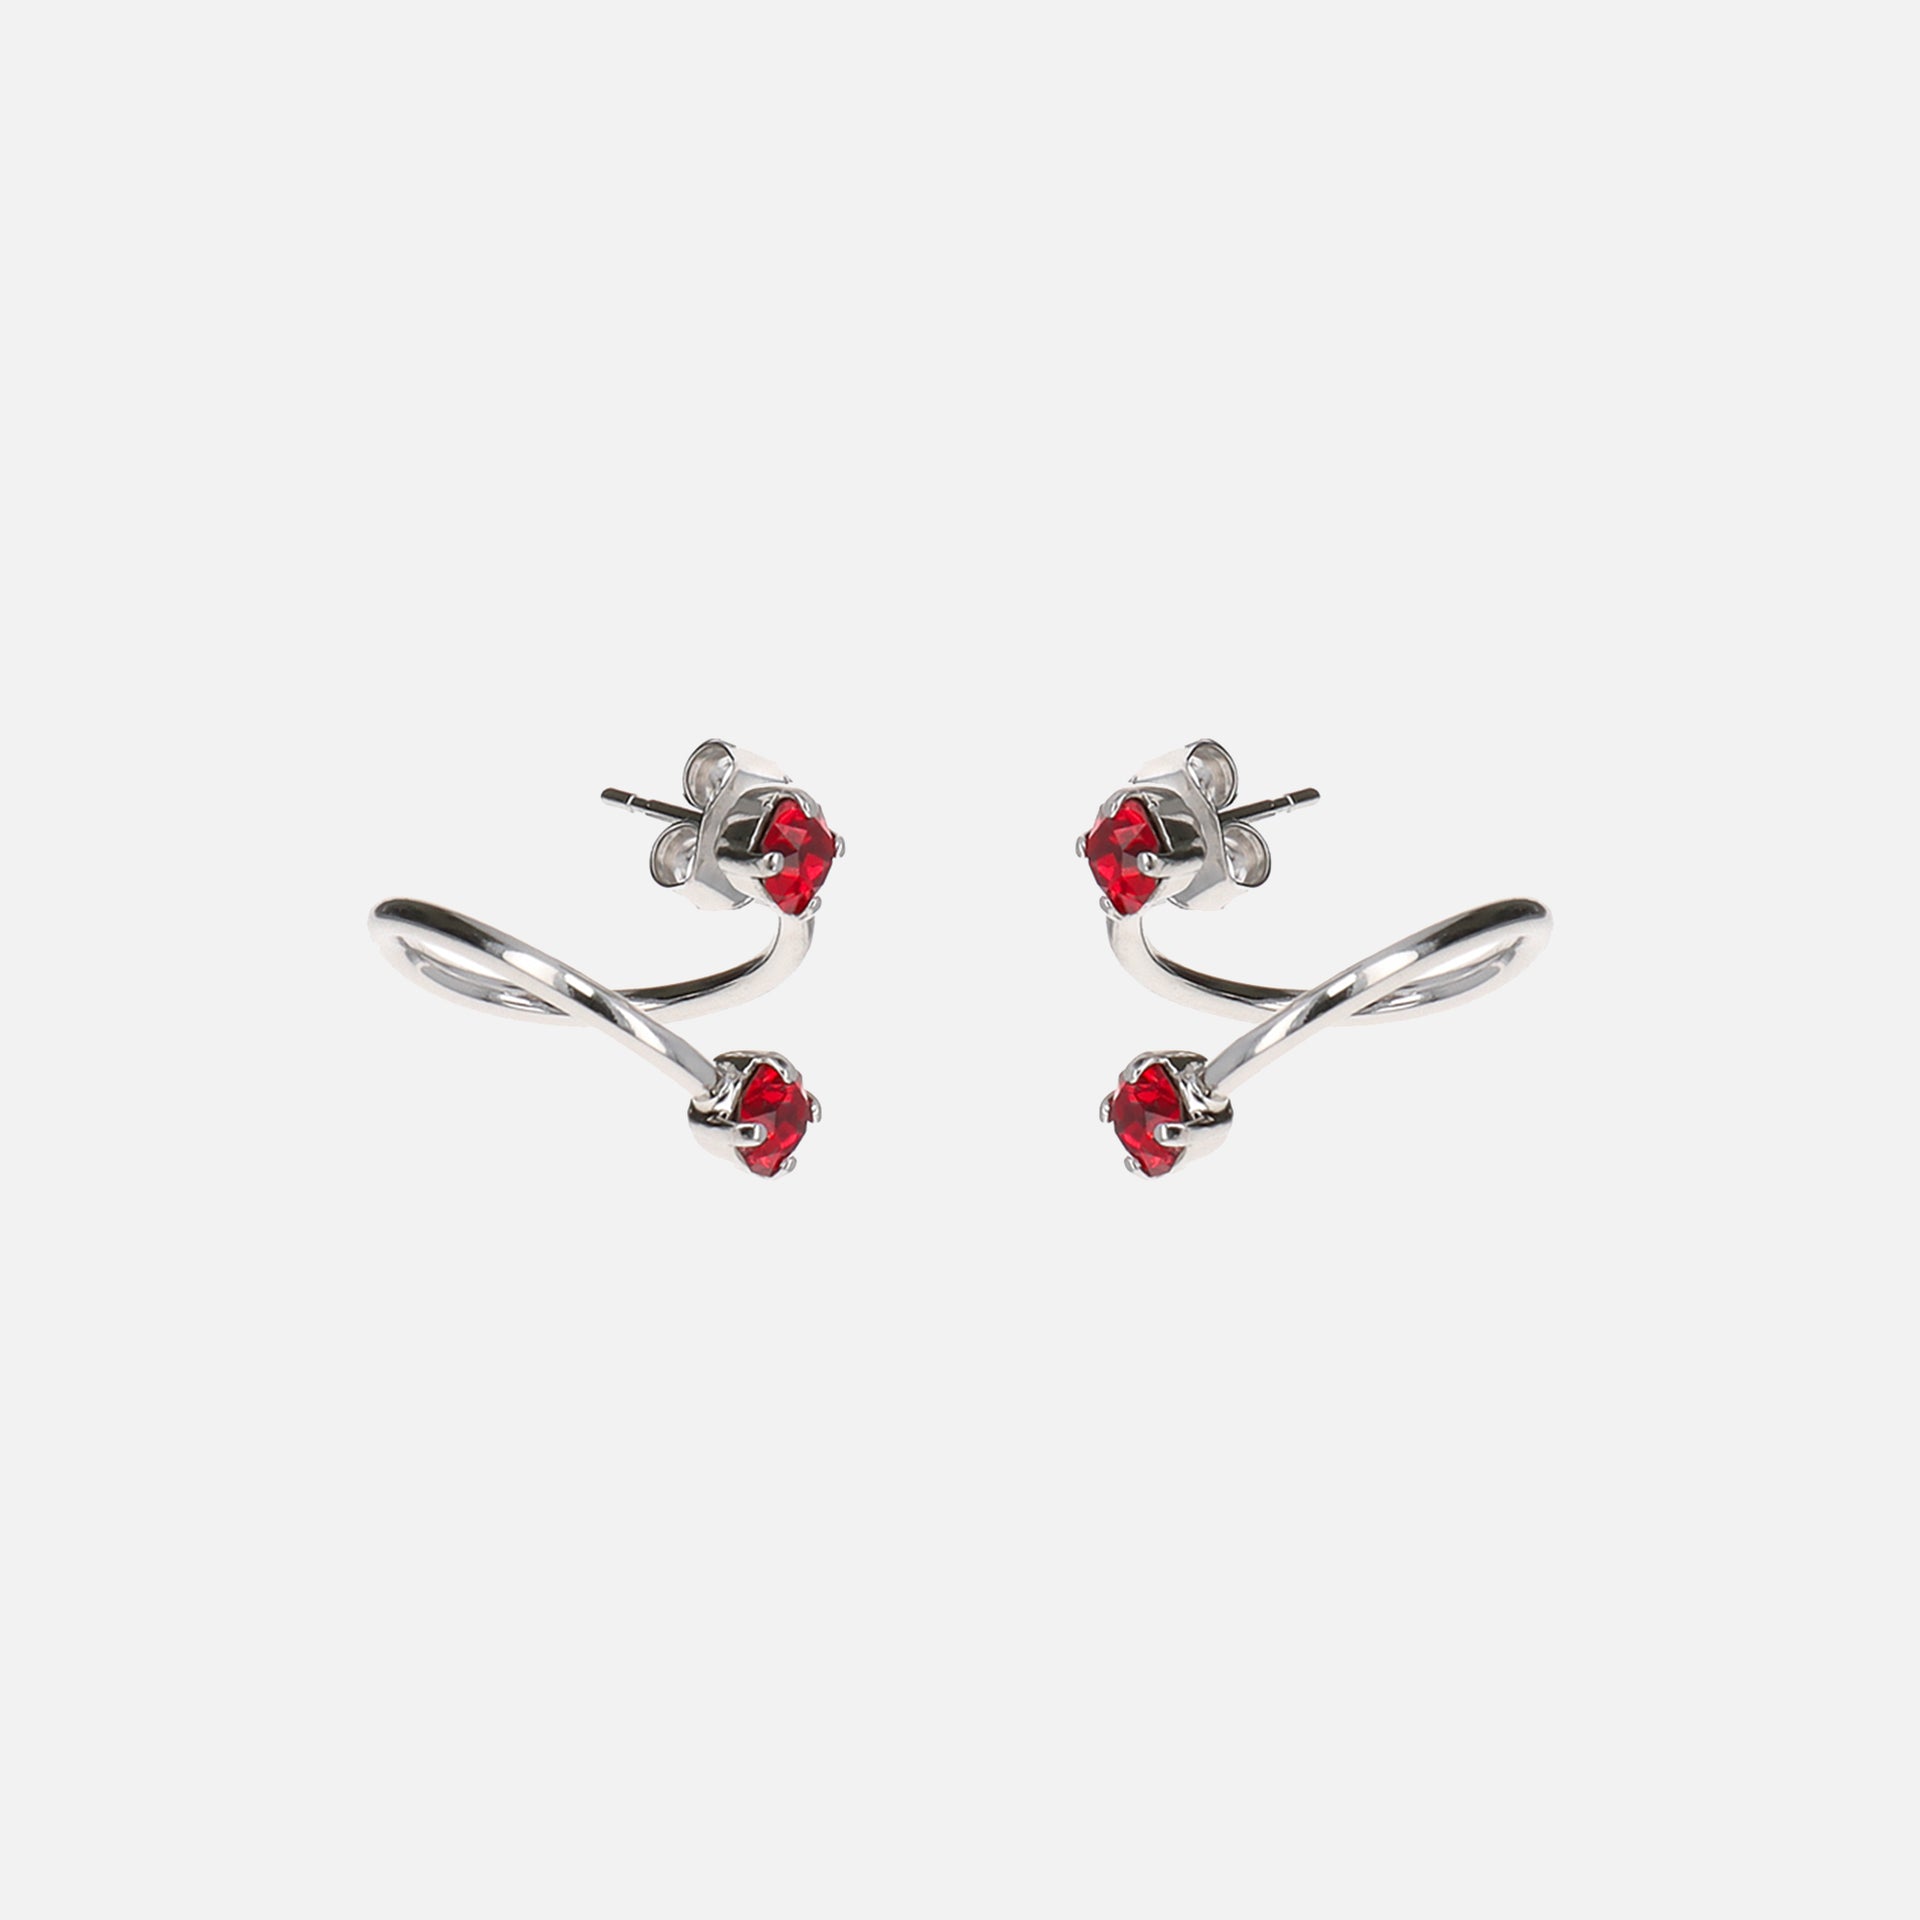 Justine Clenquet Maxine Earrings - Red